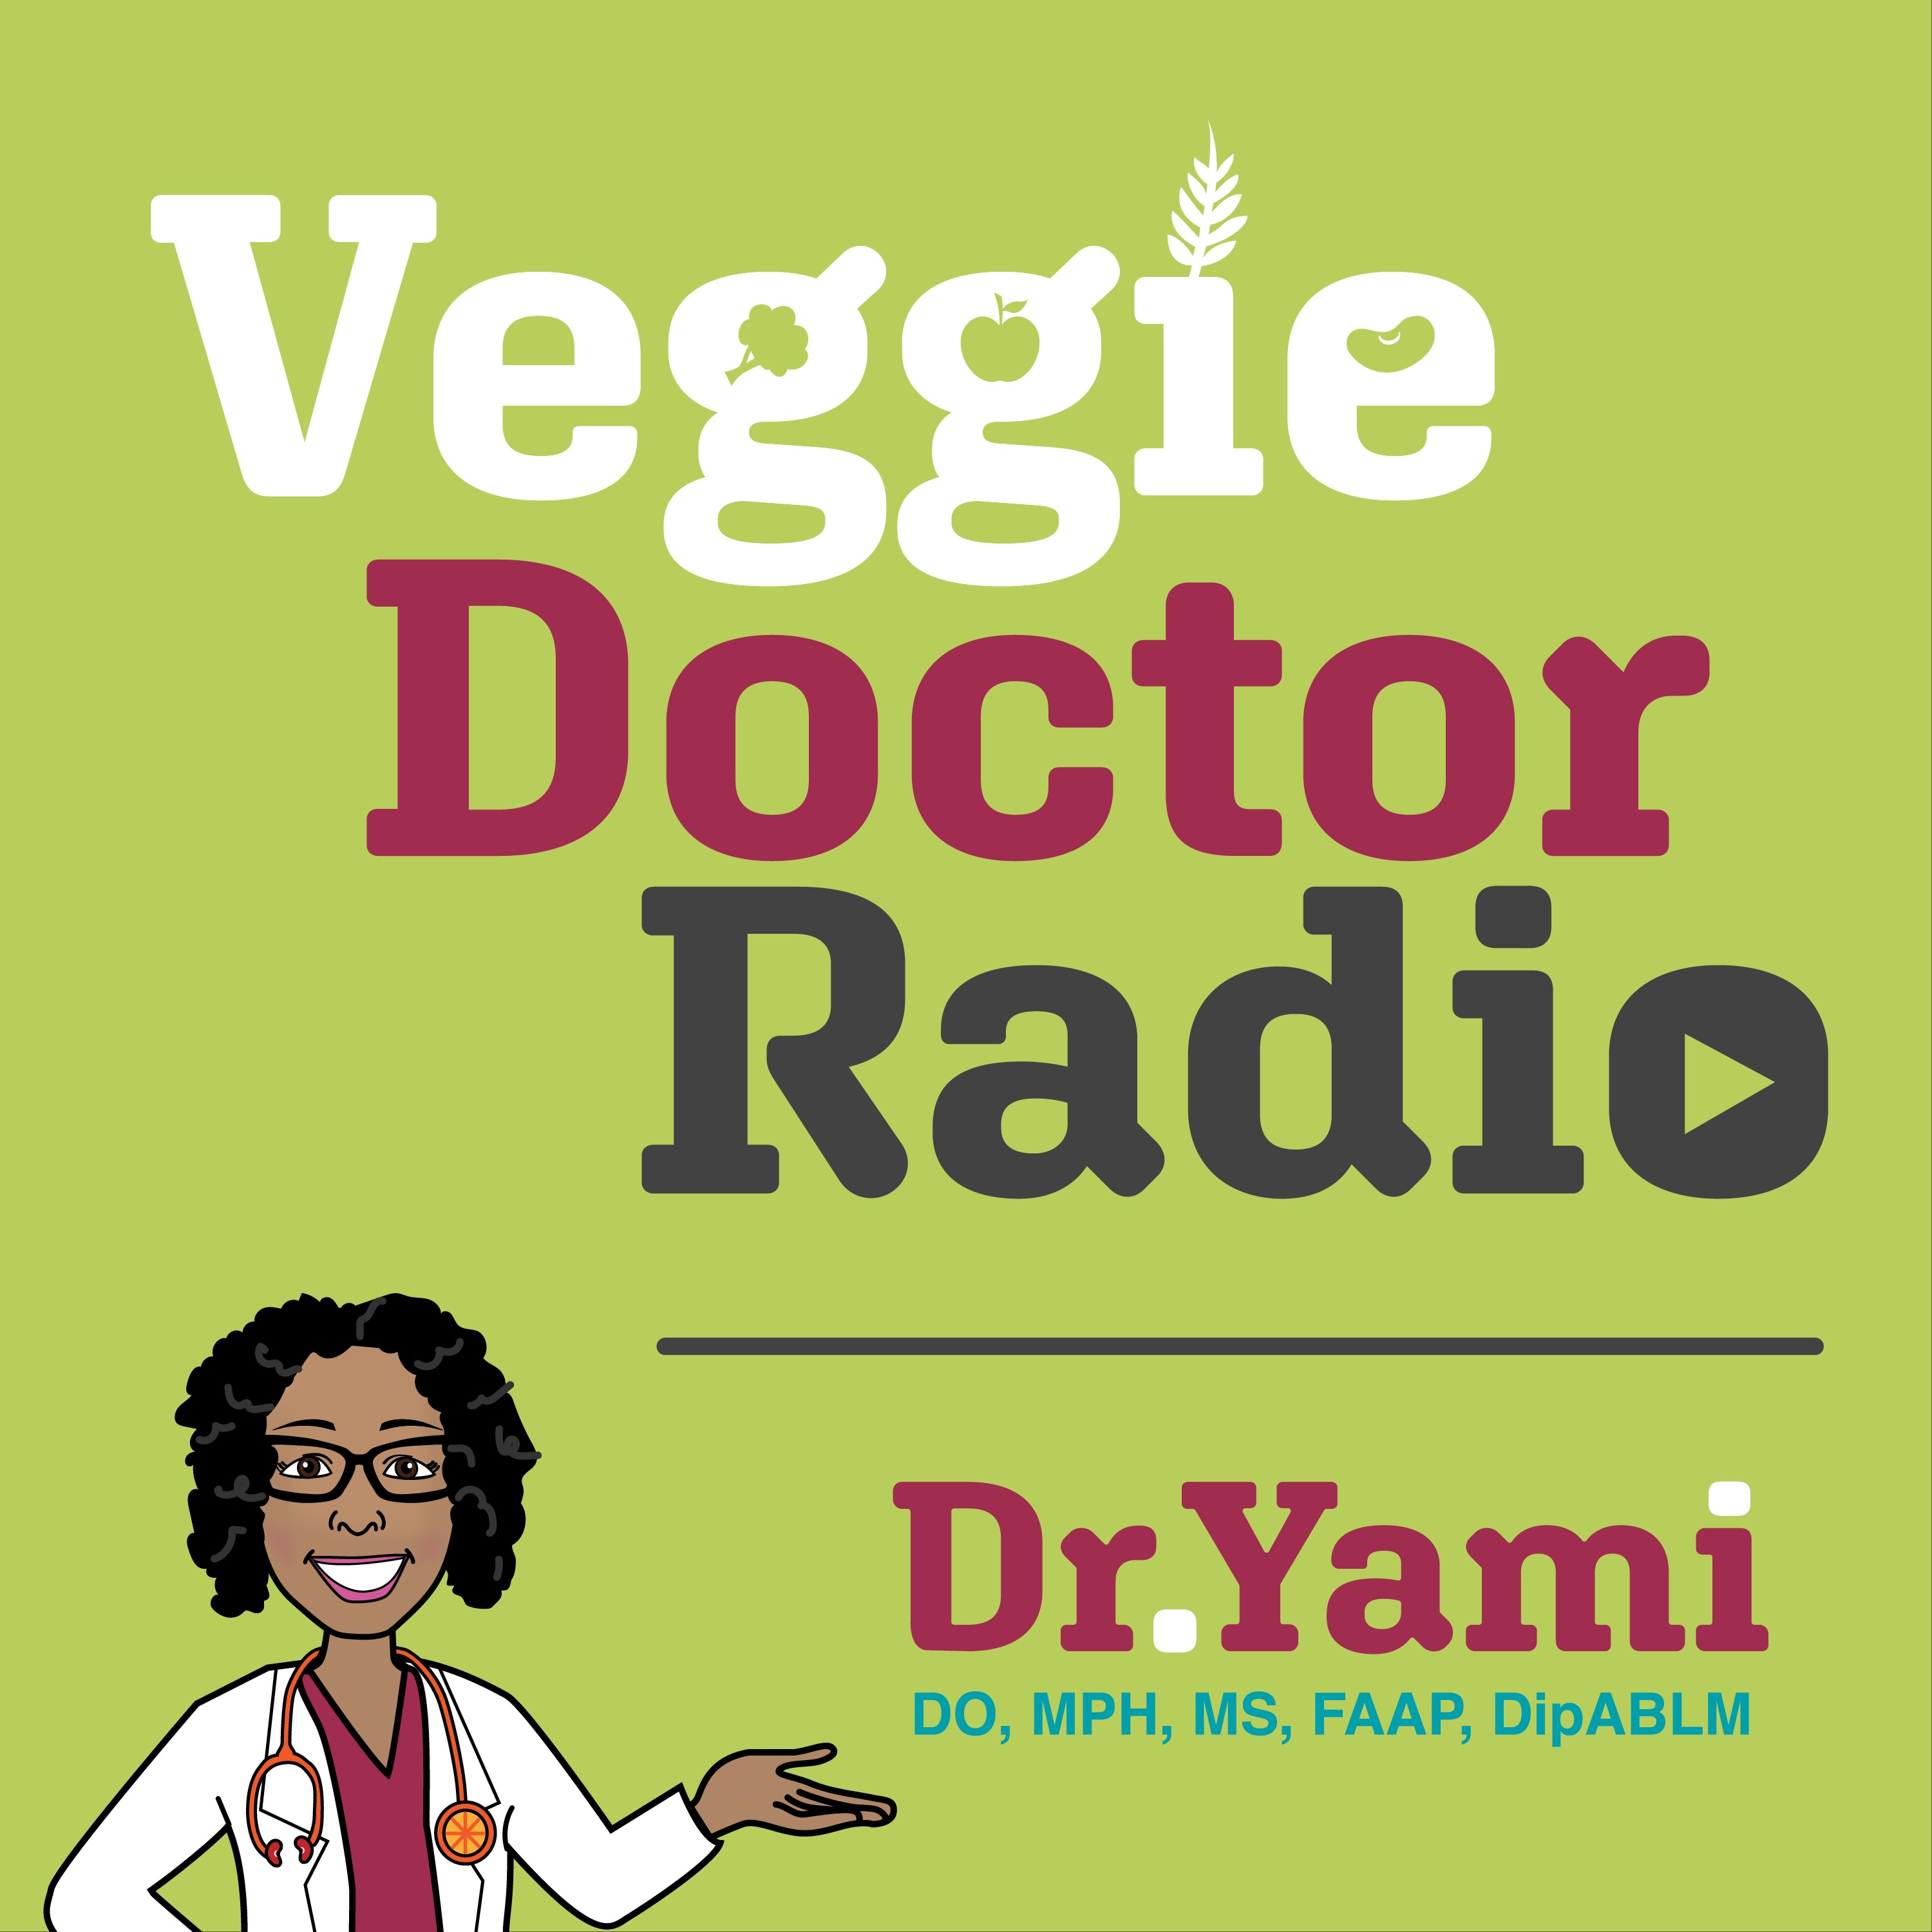 179: Why nutrition is important now more than ever (Veggie Doctor Radio)